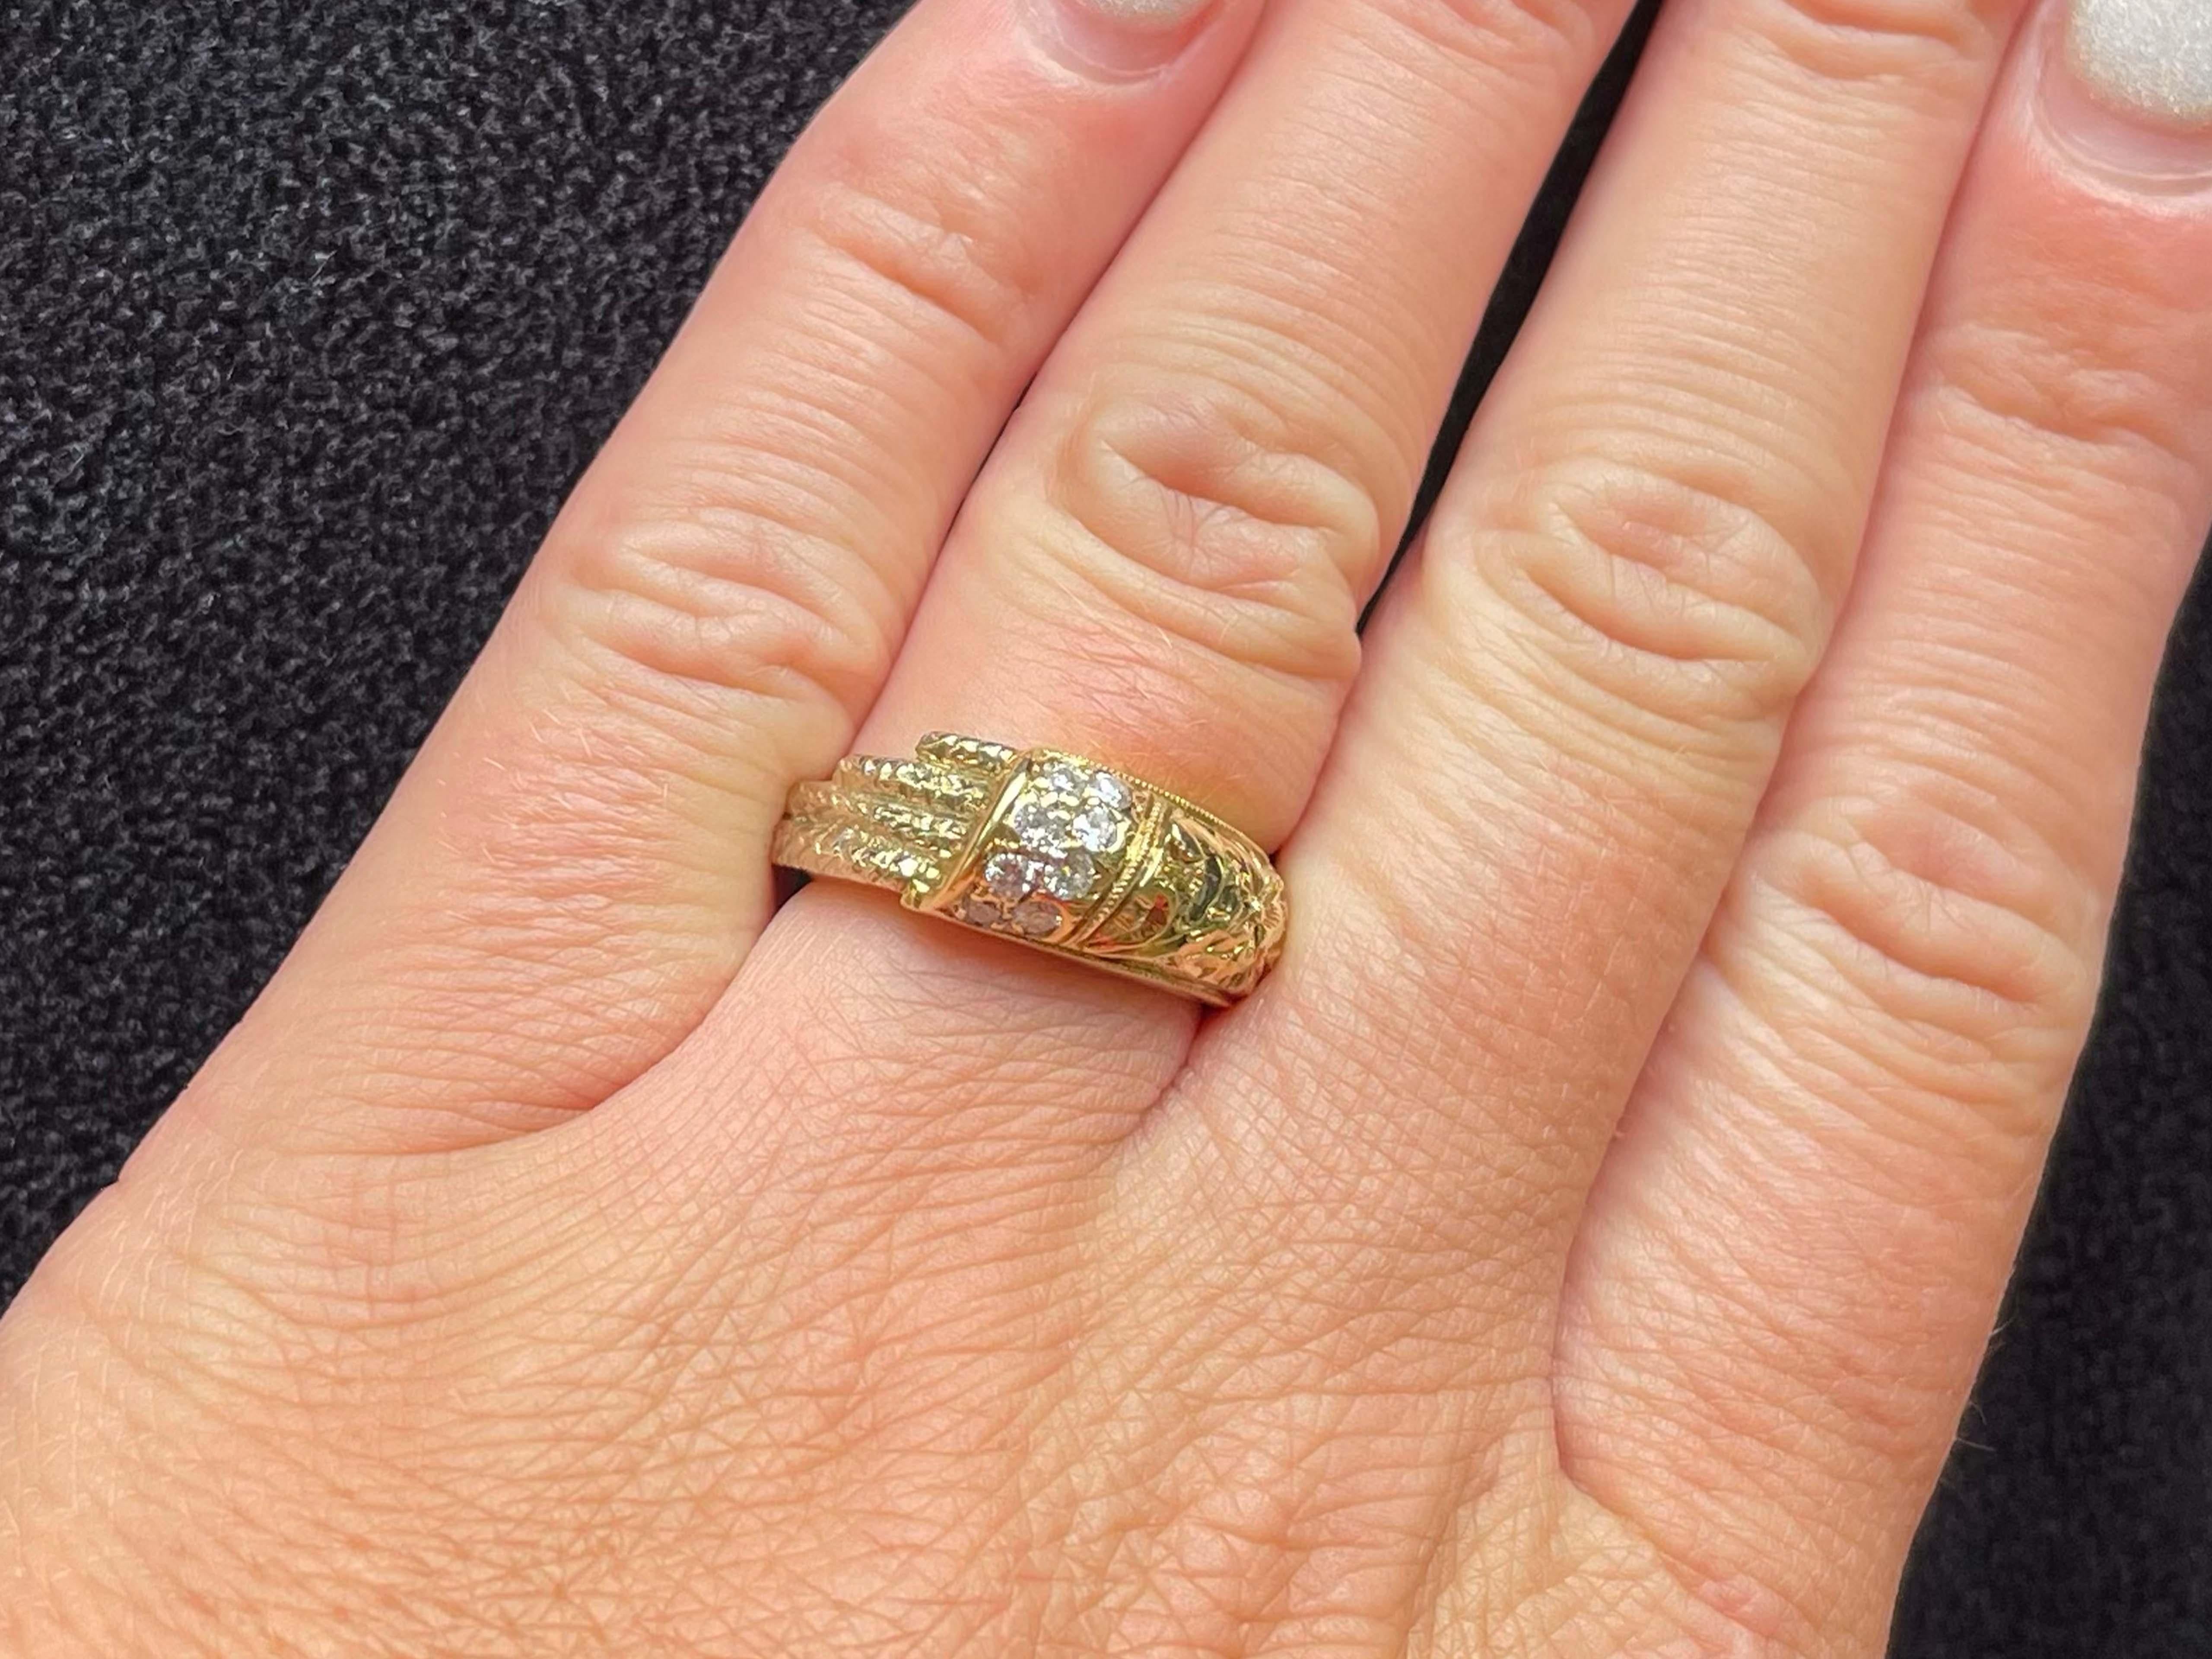 Item Specifications:

Metal: 18K Yellow Gold

Style: Statement Ring

Ring Size: 6 (resizing available for a fee)

Total Weight: 10.3 Grams
​
​Diamond Count: 8 diamonds

Diamond Carat Weight: 0.20

Diamond Color: G-I

Diamond Clarity: VS

Condition: